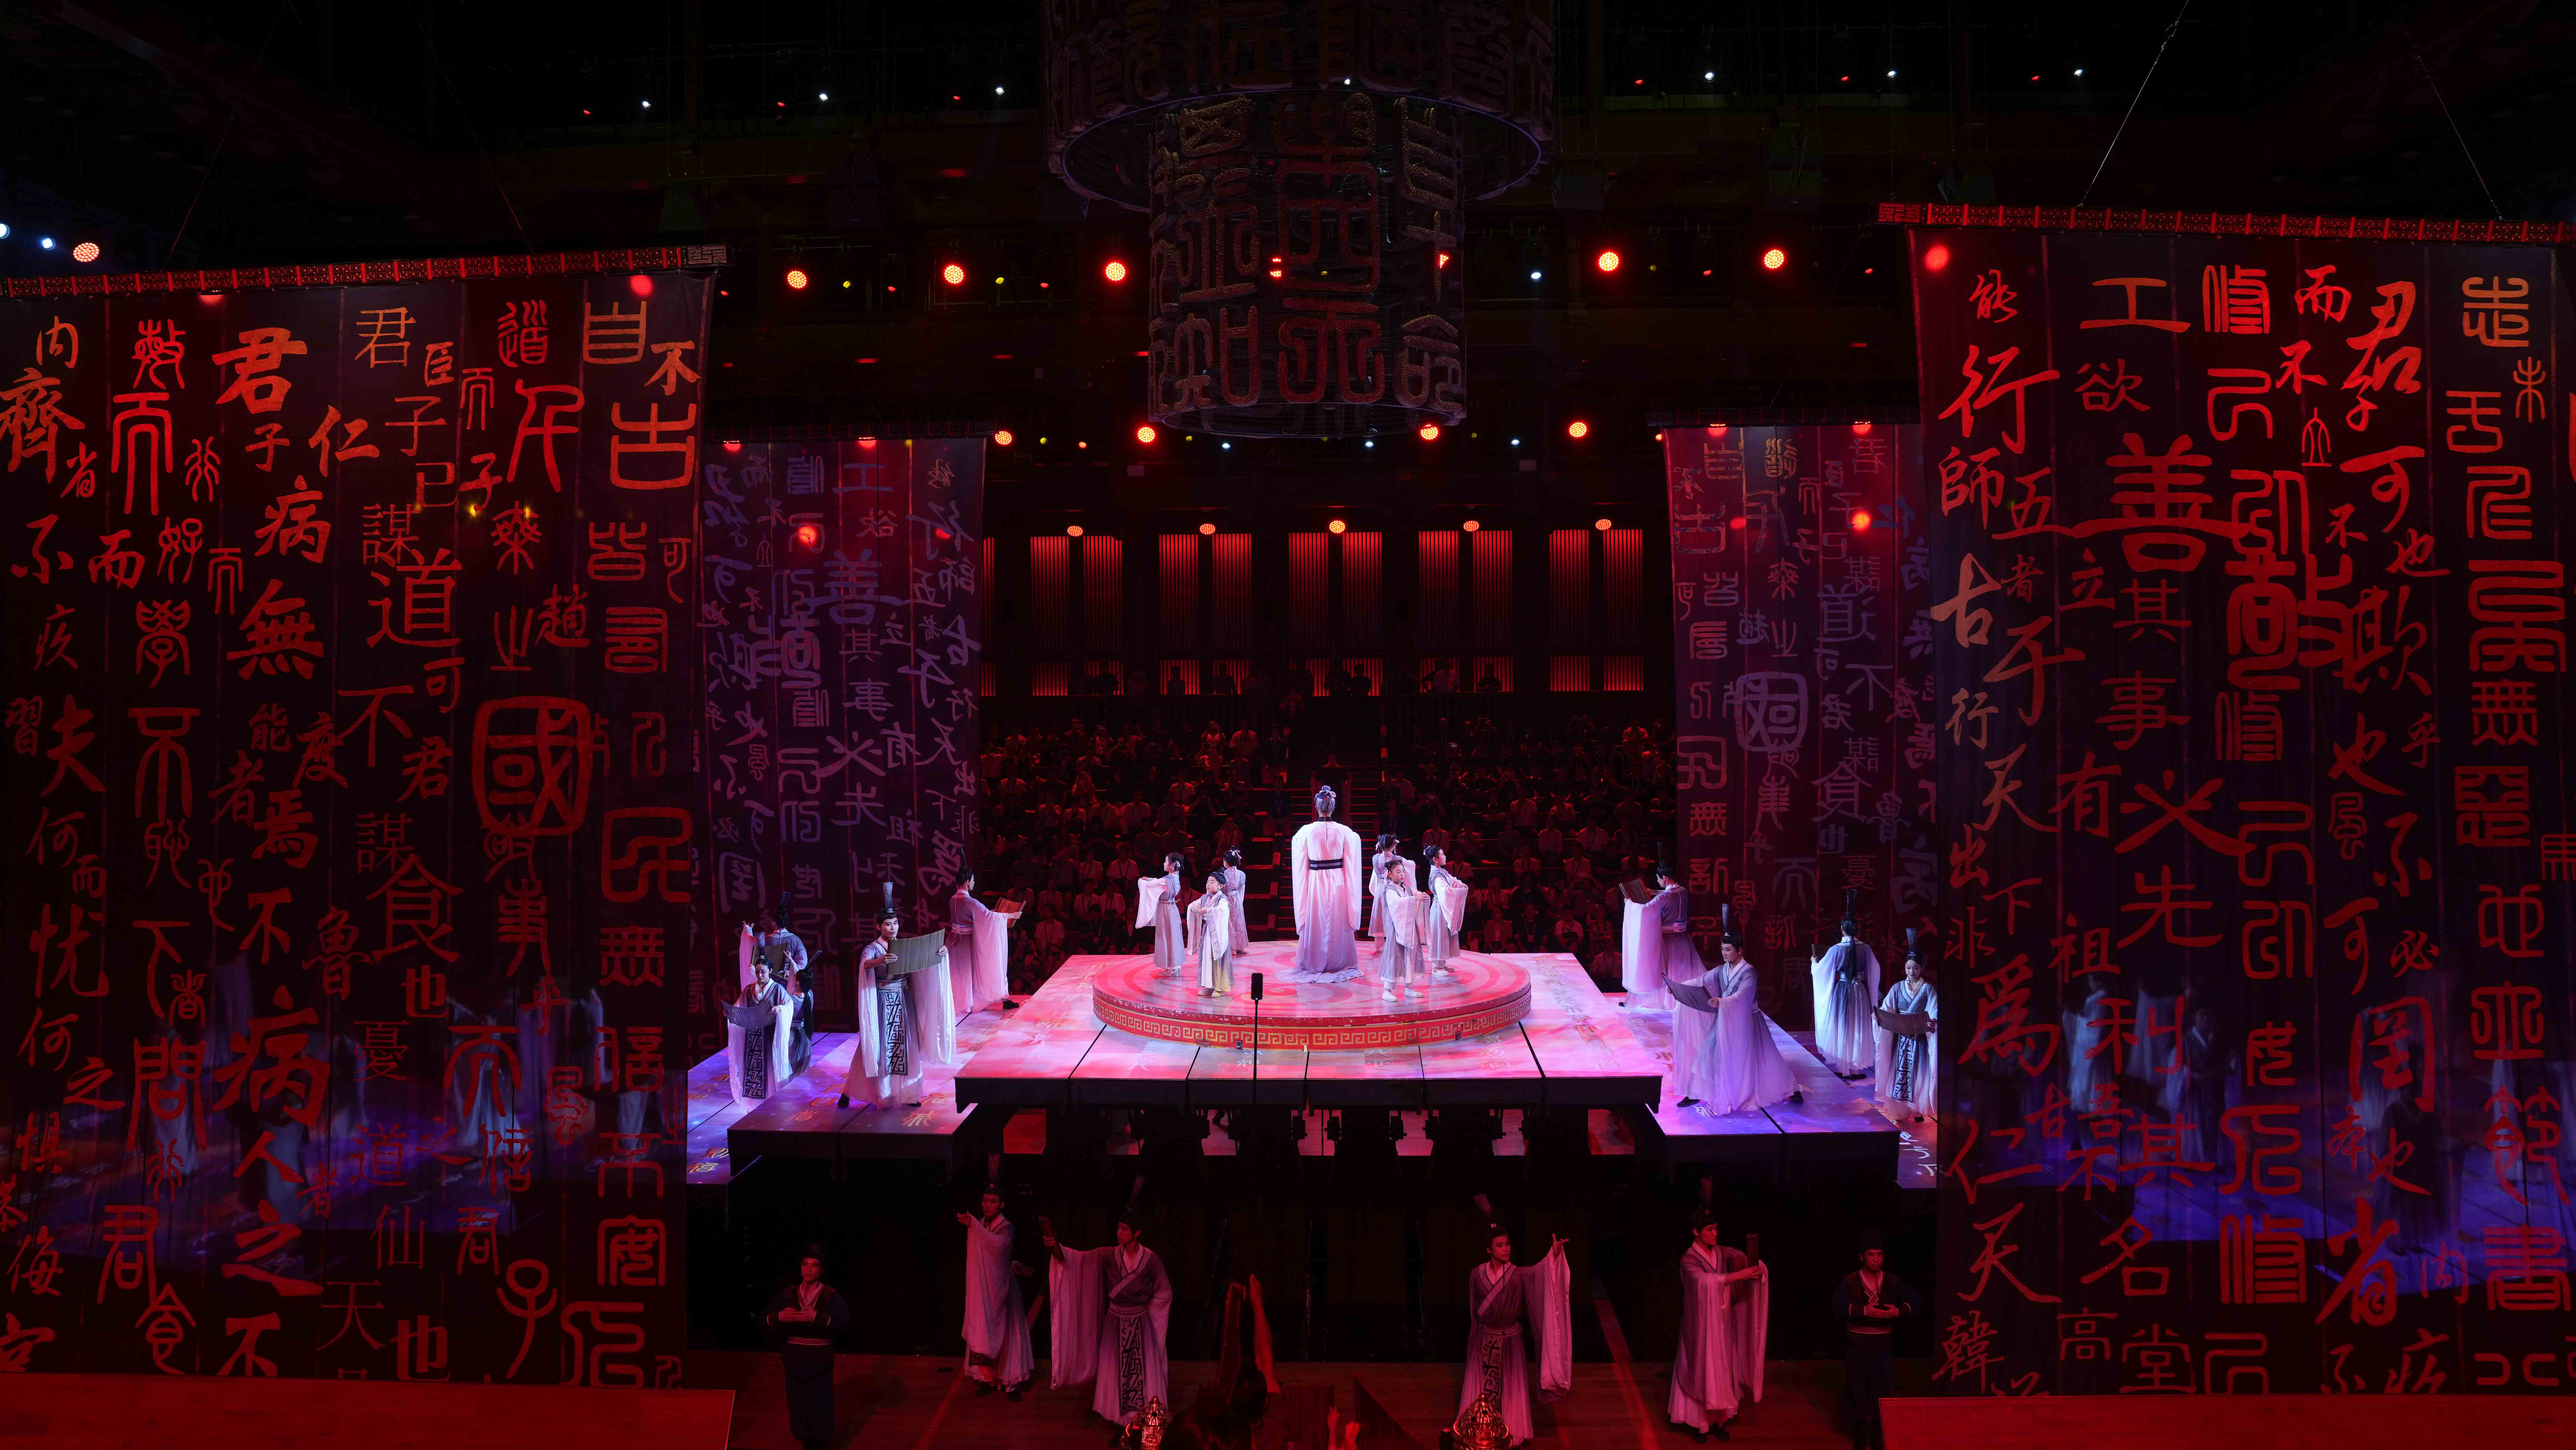 Immerse in the spectacle of 'Jinshengyuzhen' show